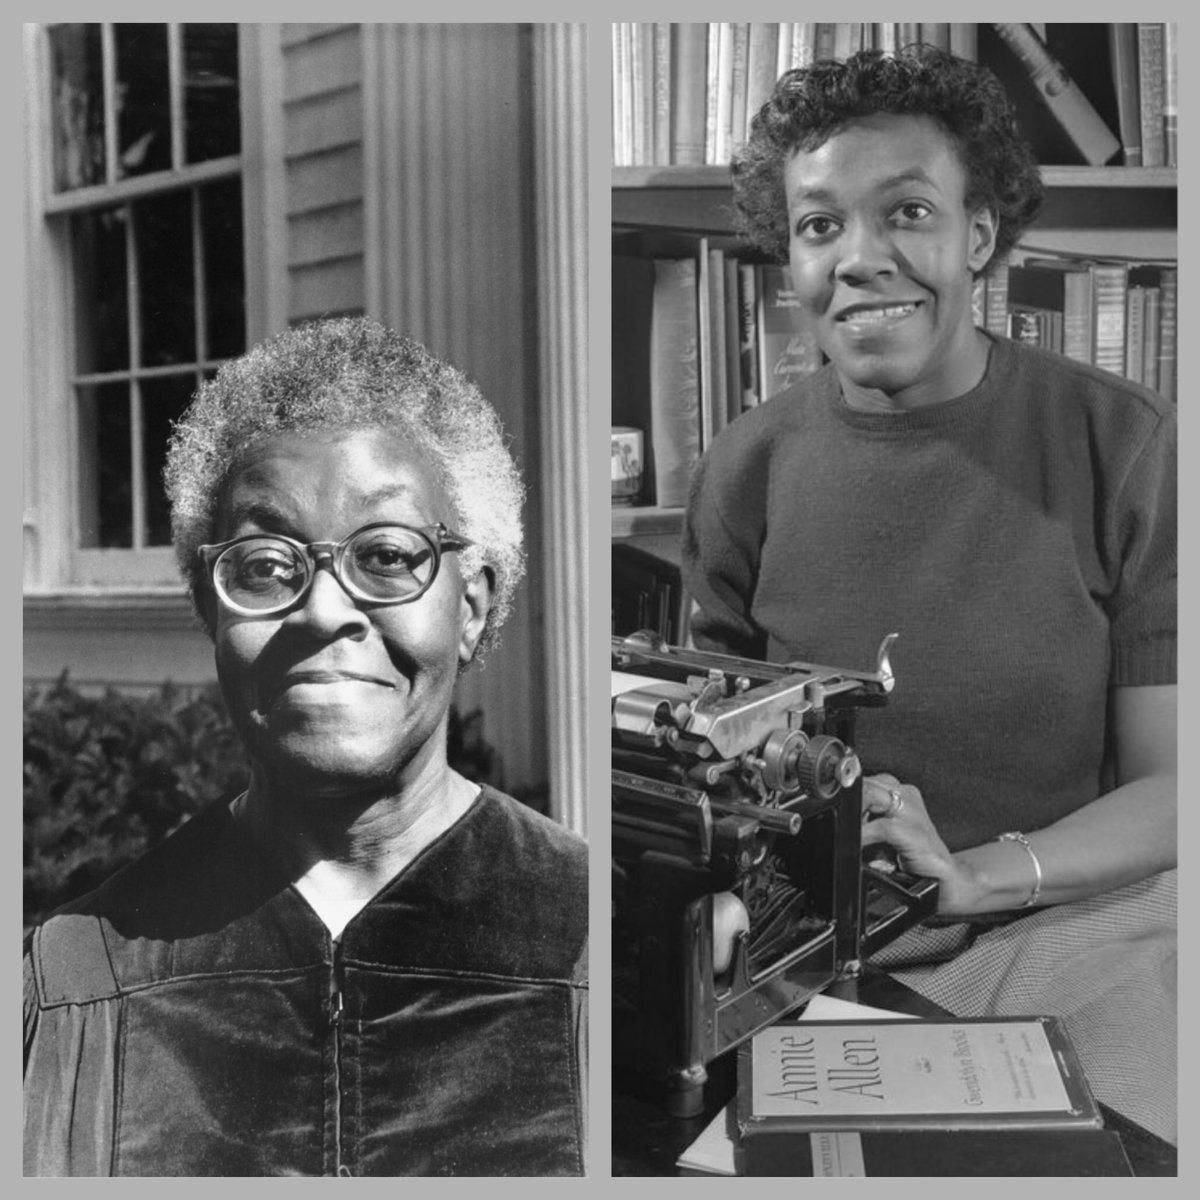 Gwendolyn Brooks is revered as one of the most influential poets of the 20th century. Born in 1917, she became the first Black woman to win the Pulitzer Prize in 1950. She was also the poet laureate for the state of Illinois. #BlackHistoryMonth    #BlackHerstory